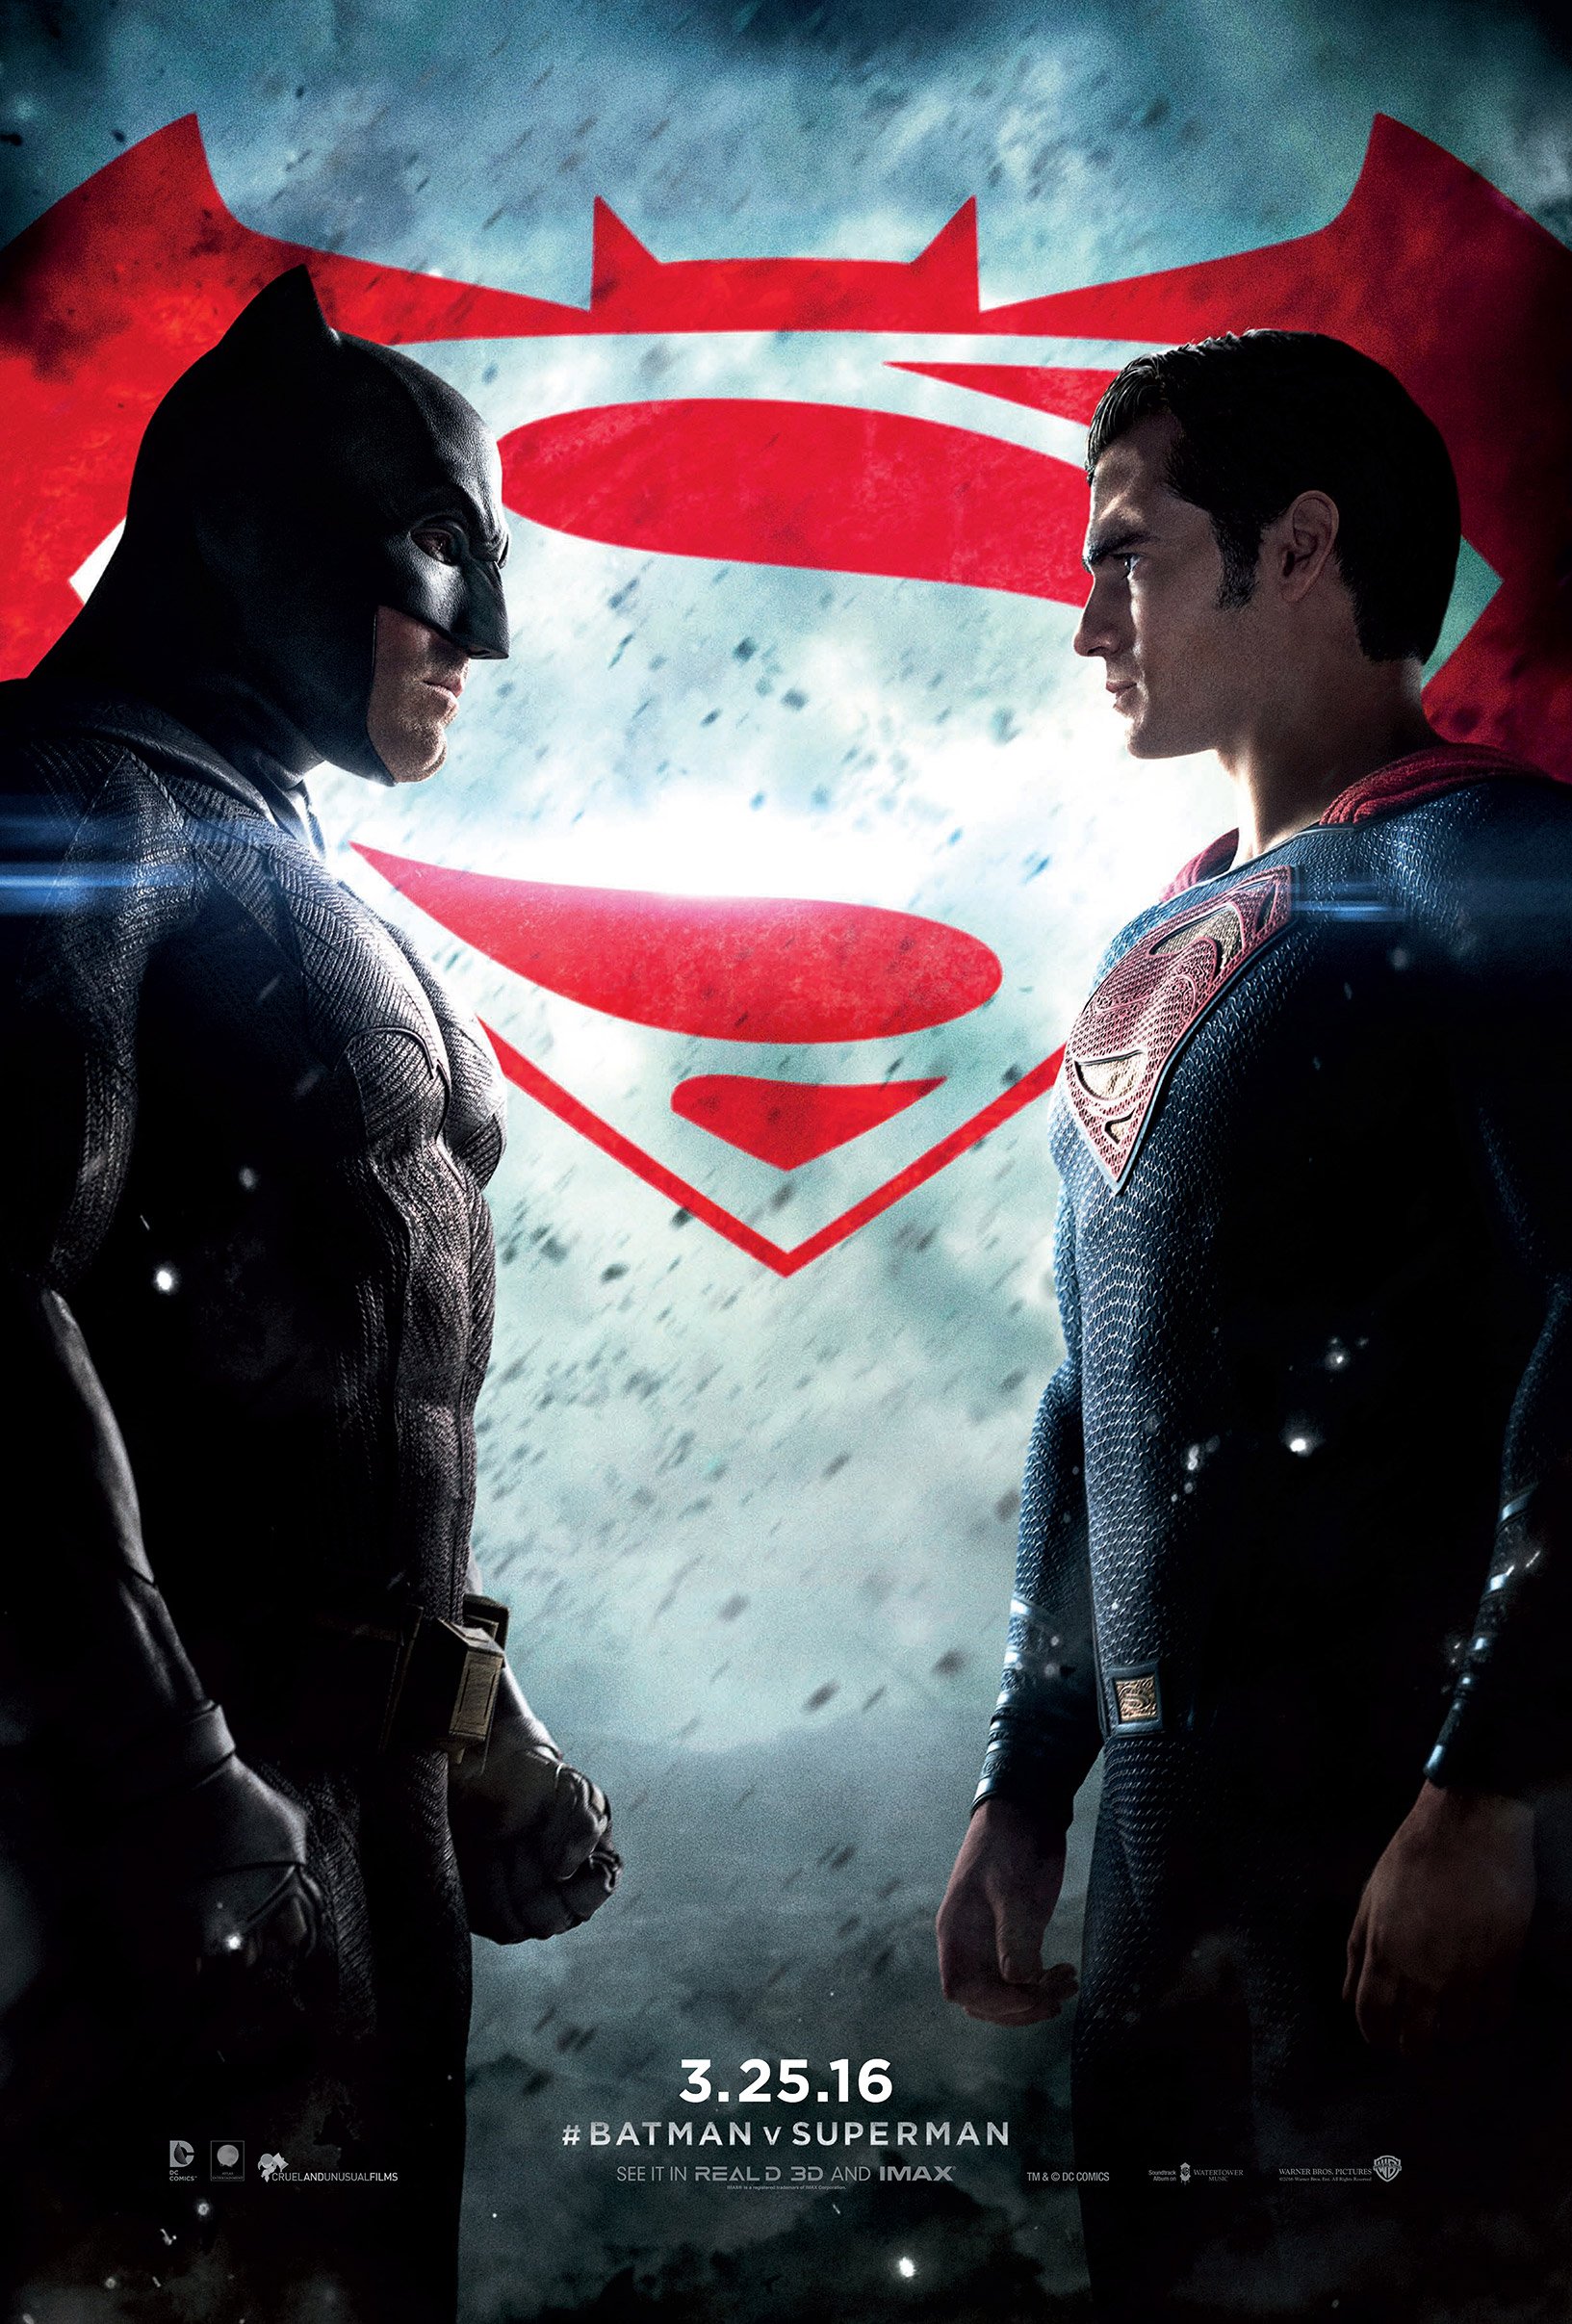 Poster of the movie Batman v Superman: Dawn of Justice